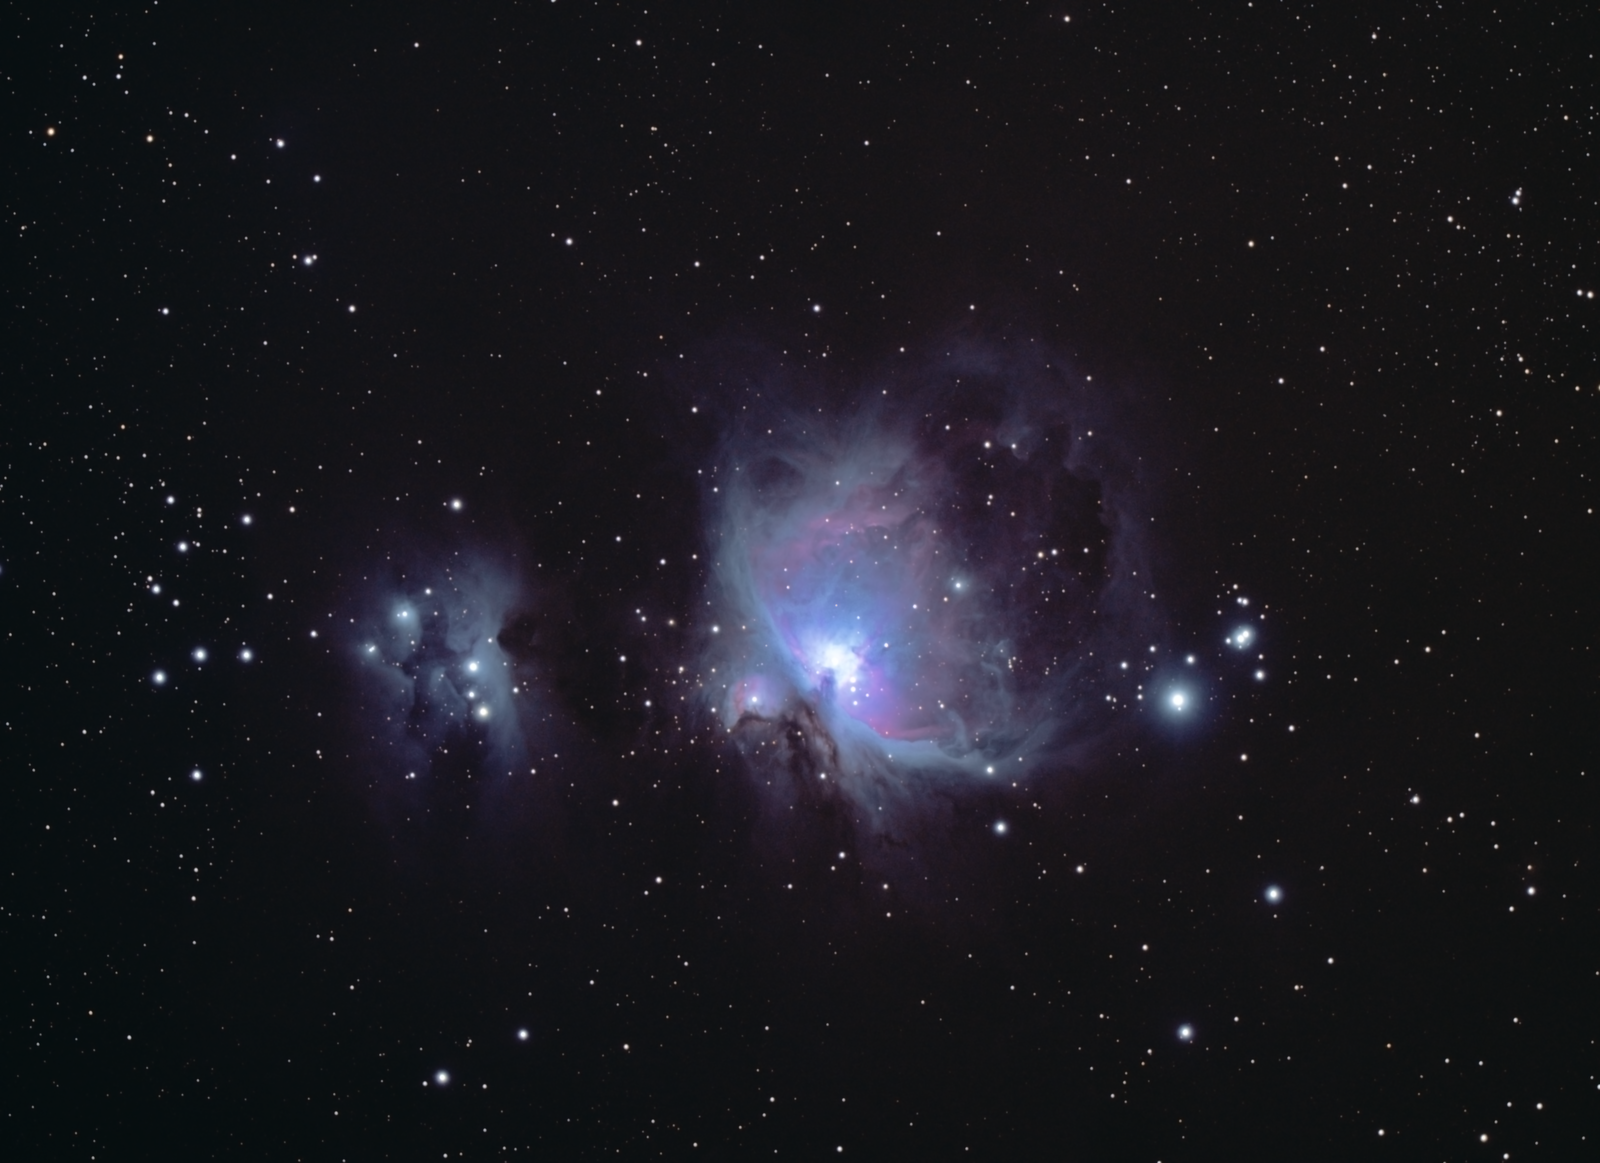 M42 - March 29, 2016